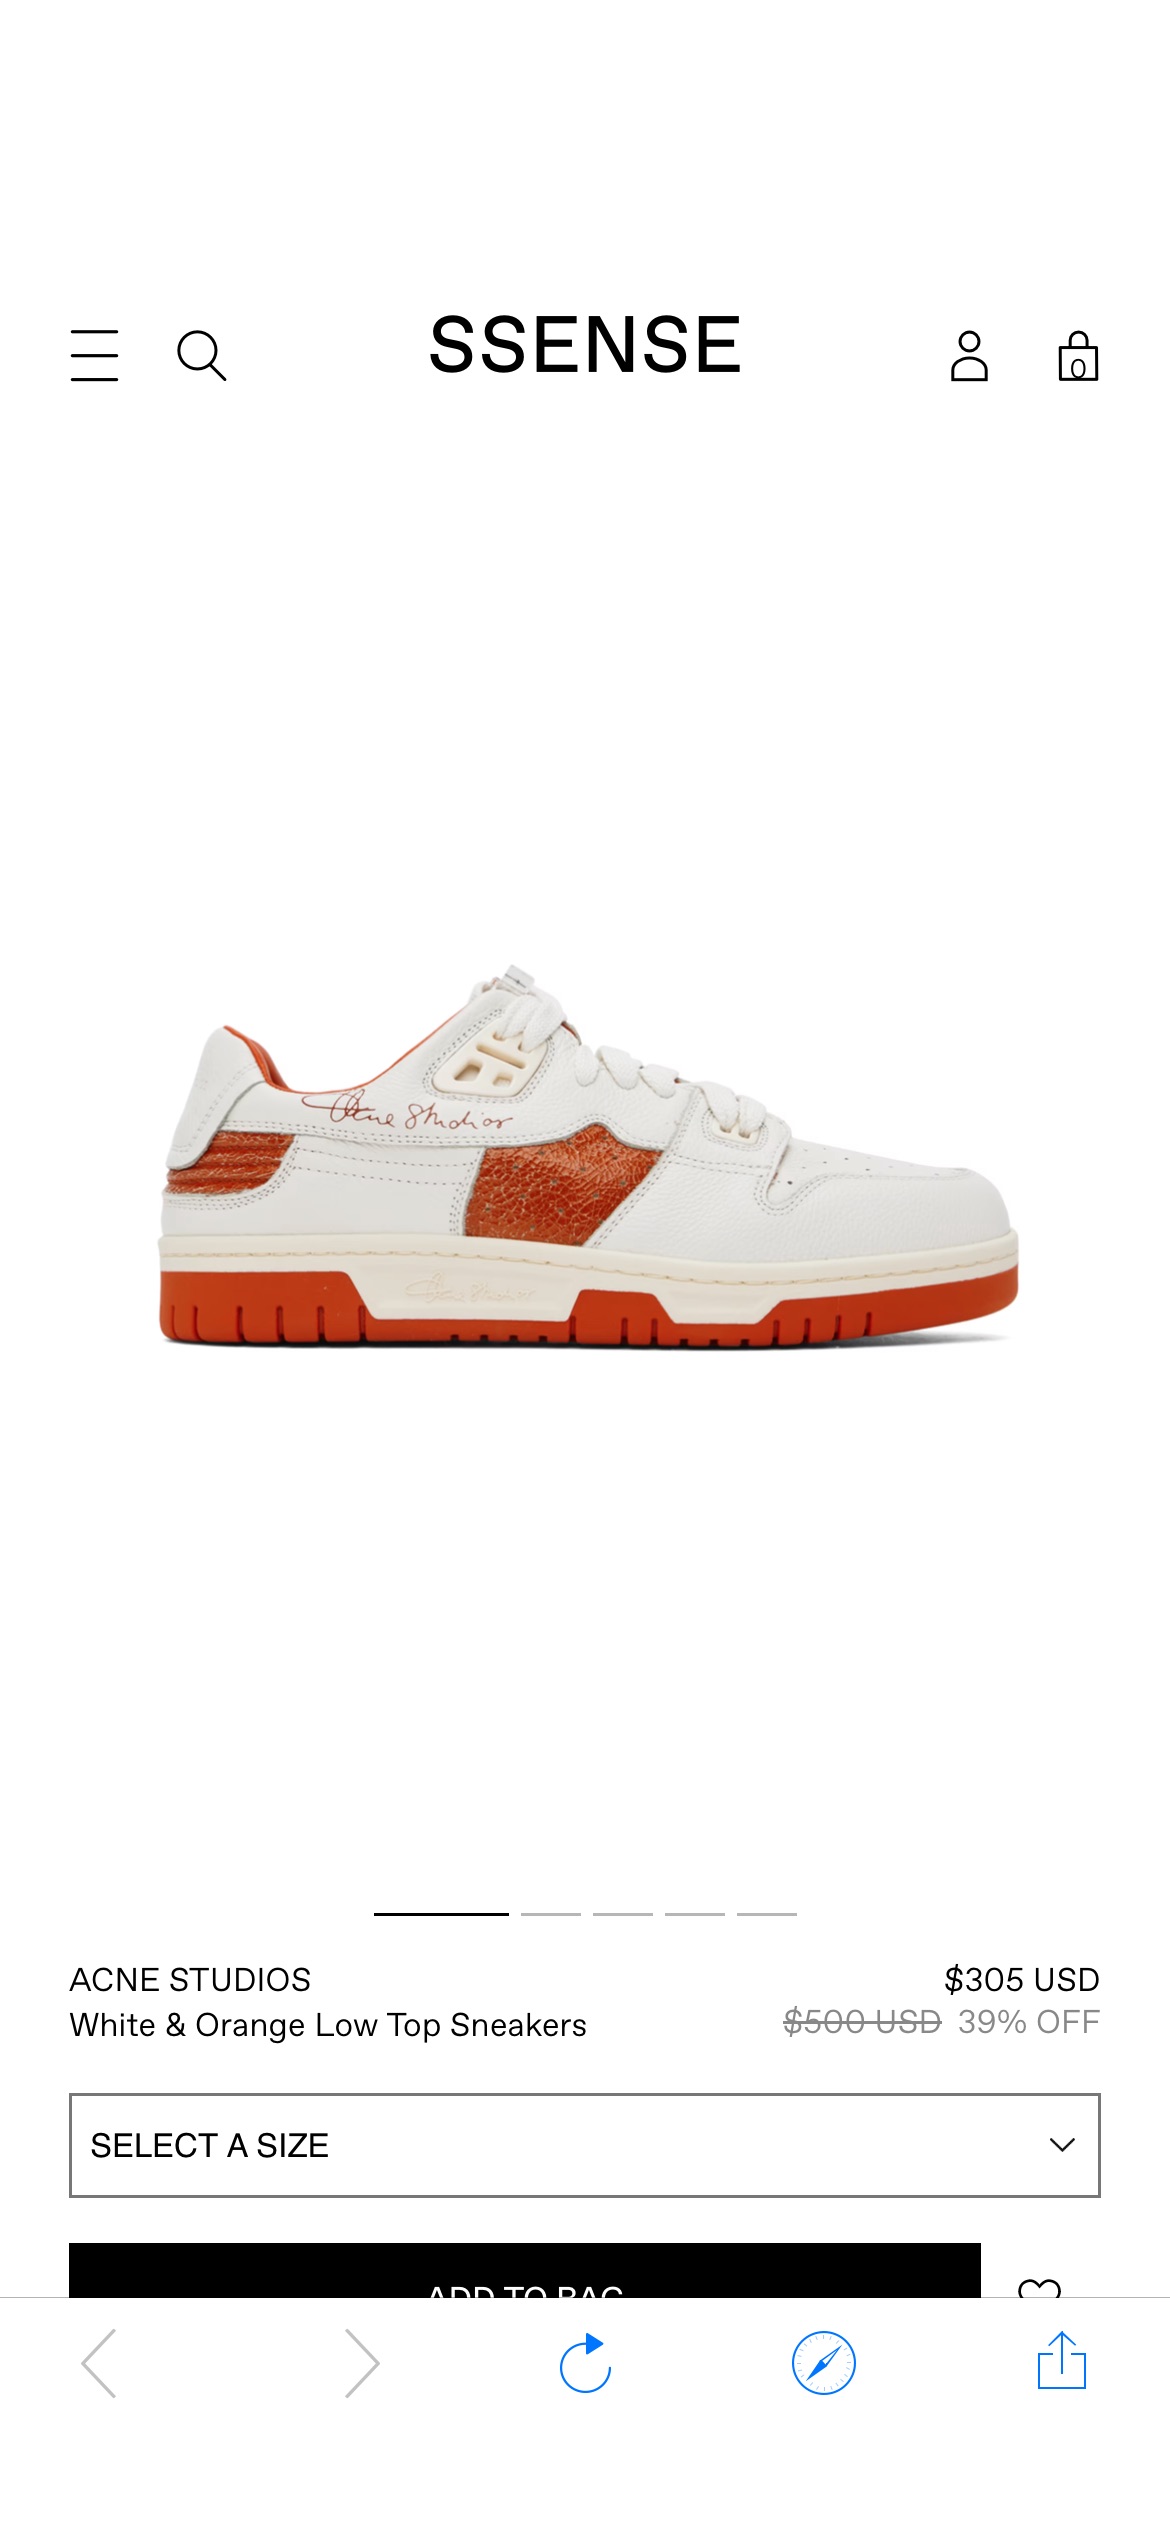 White & Orange Low Top Sneakers by Acne Studios on Sale